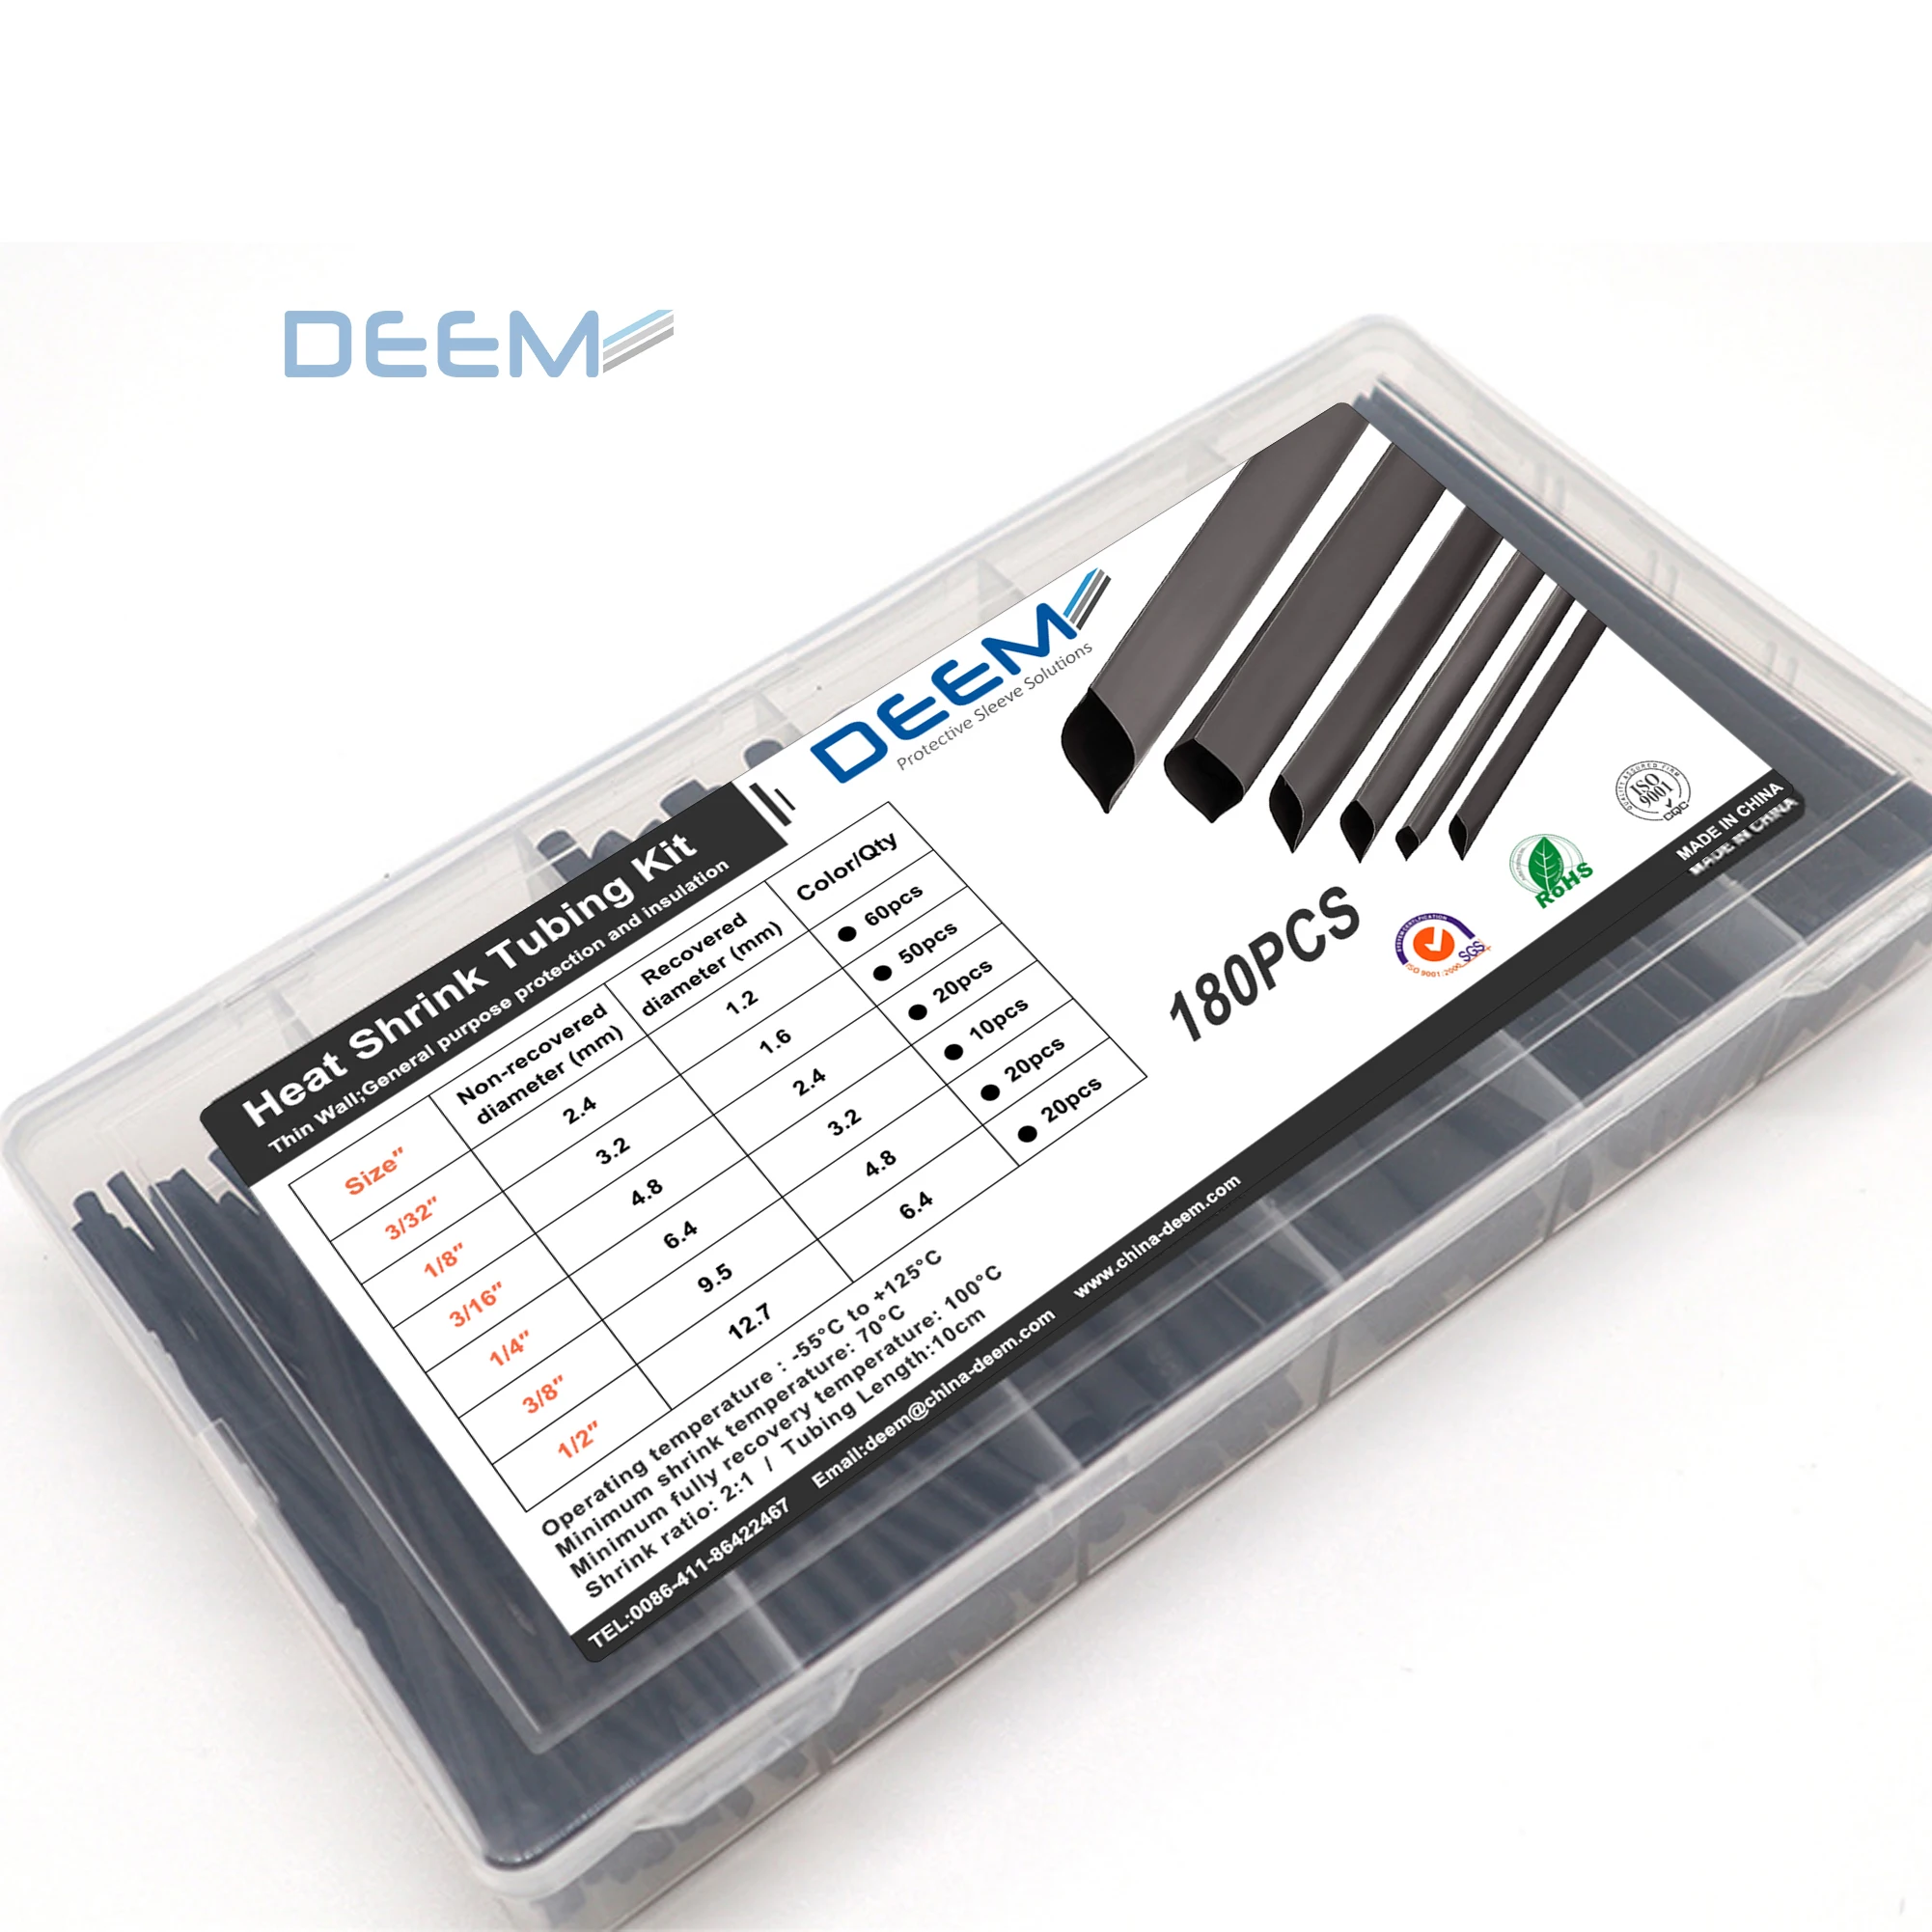 

DEEM 180PCS Heat shrink tubing for Electrical wire cable wrap assortment insulation tube kits with box